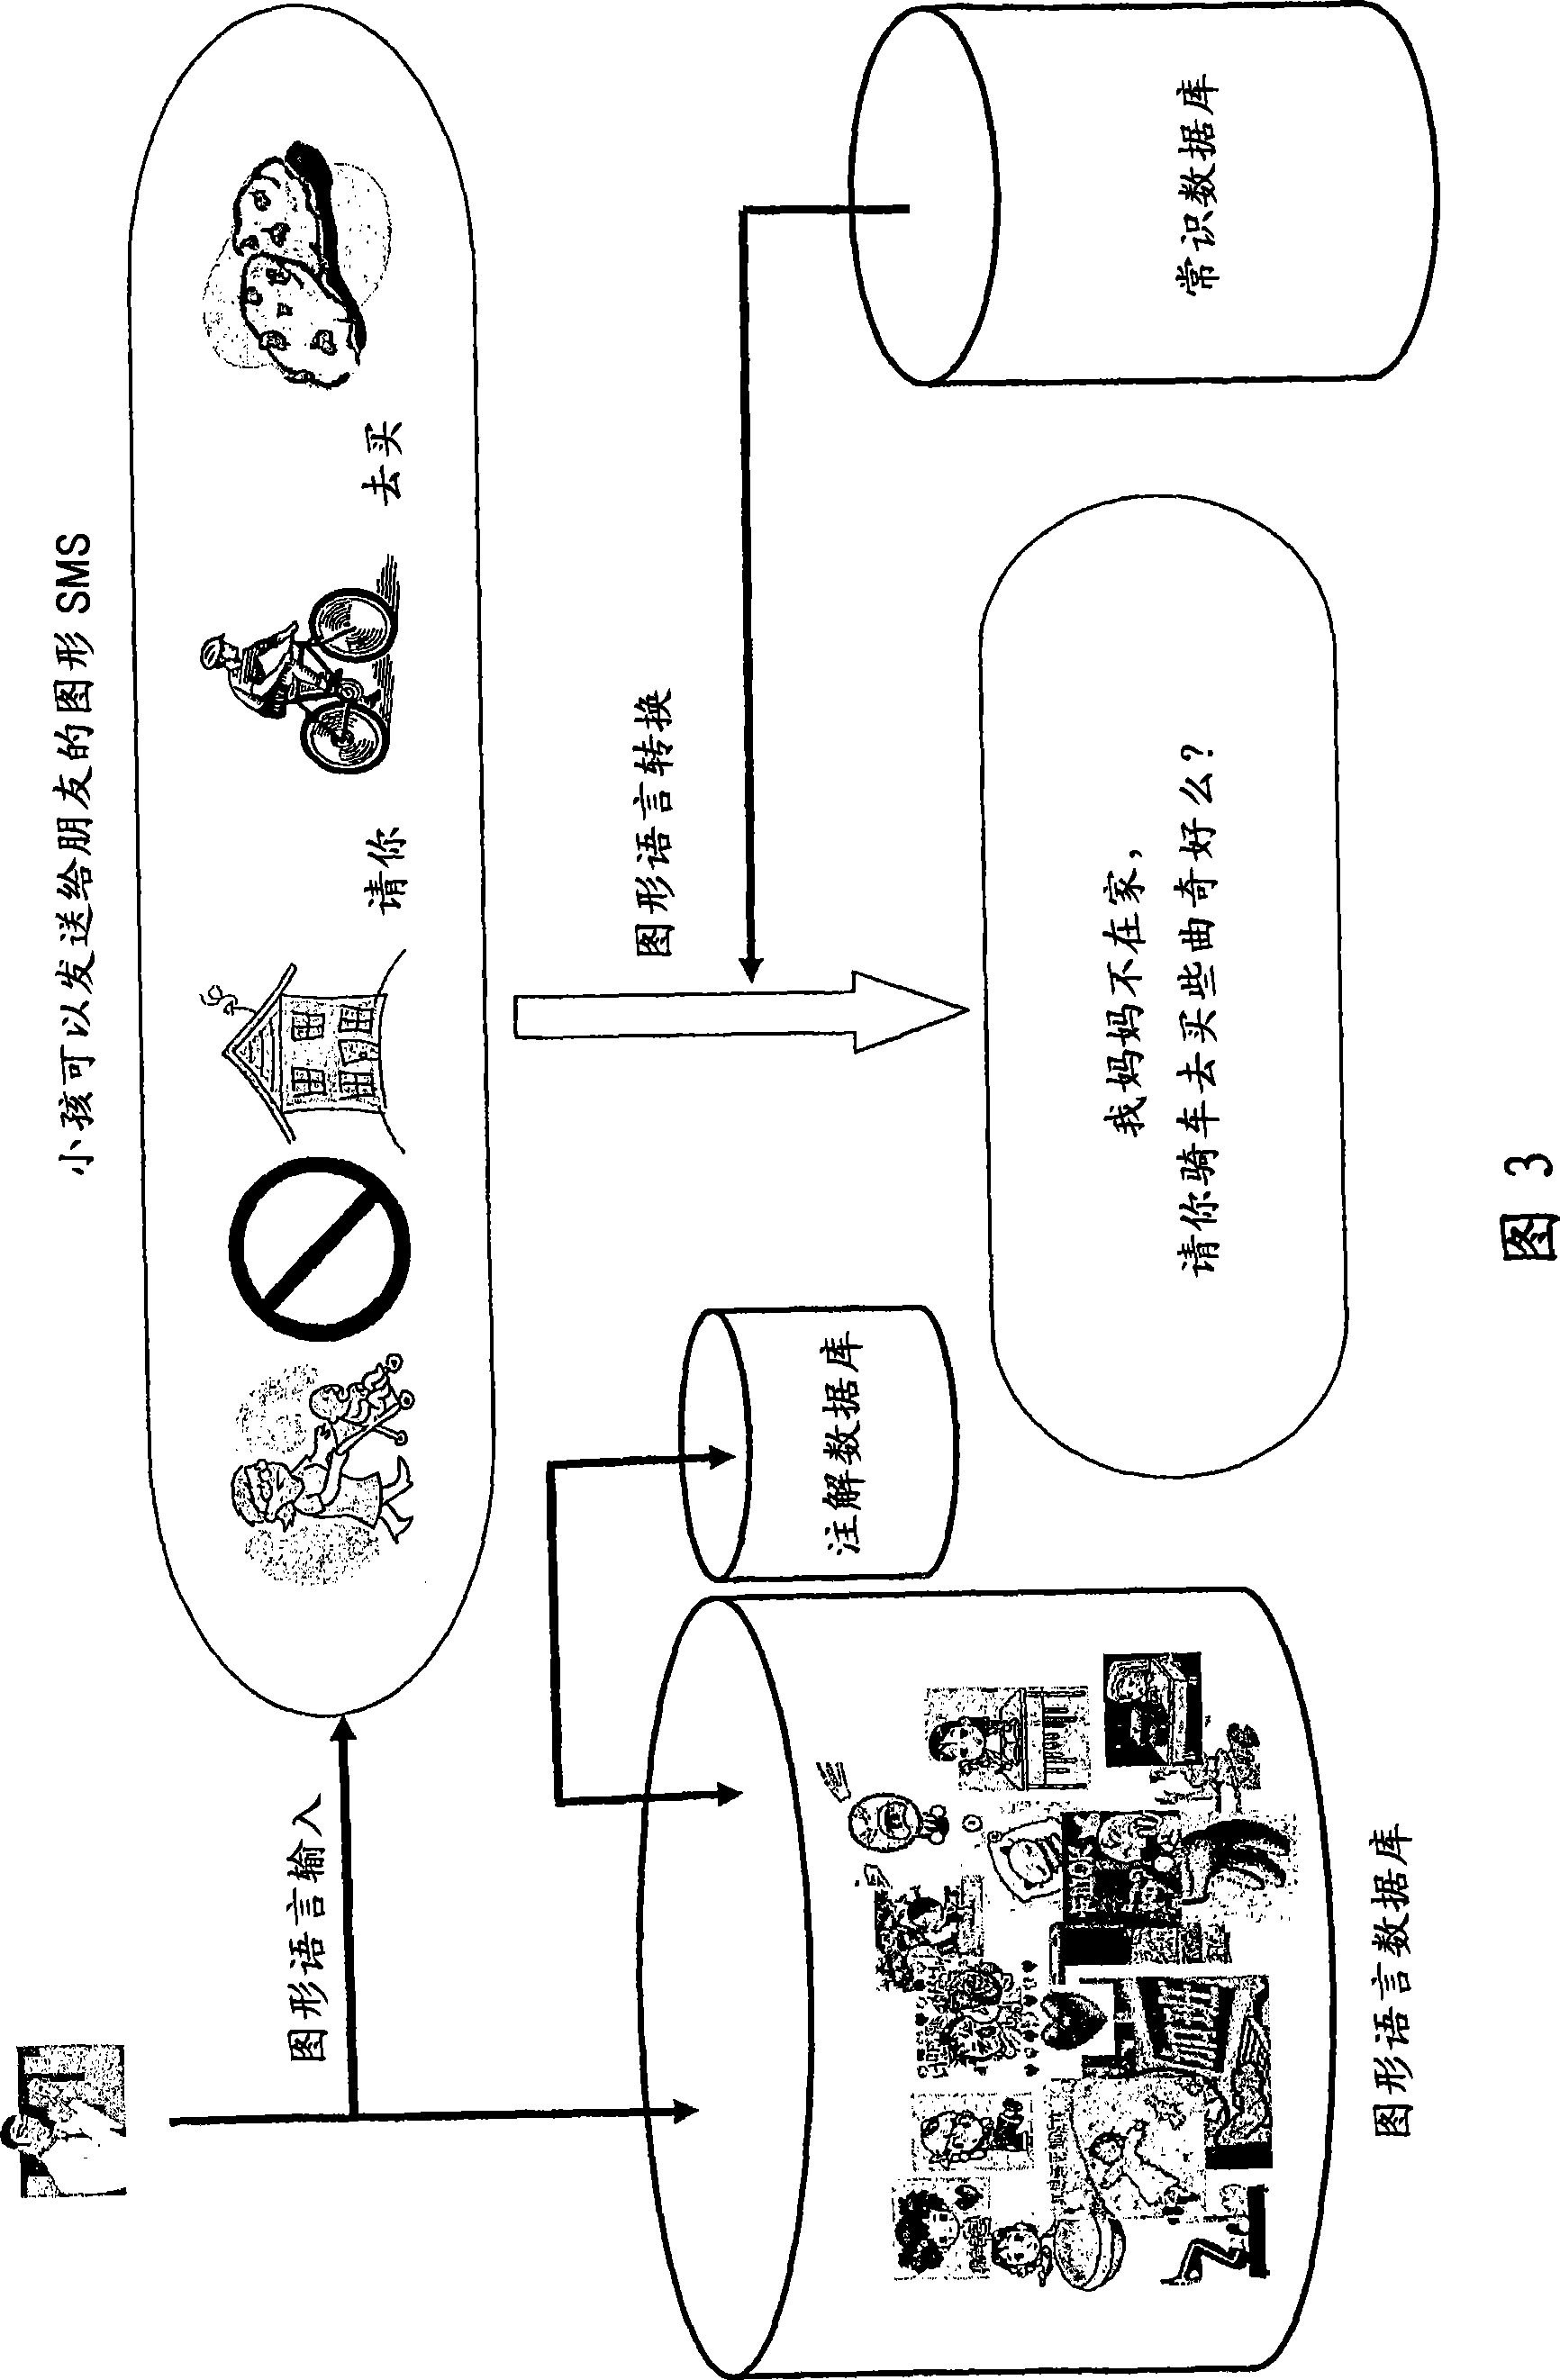 Method, apparatus and computer program product for generating a graphical image string to convey an intended message